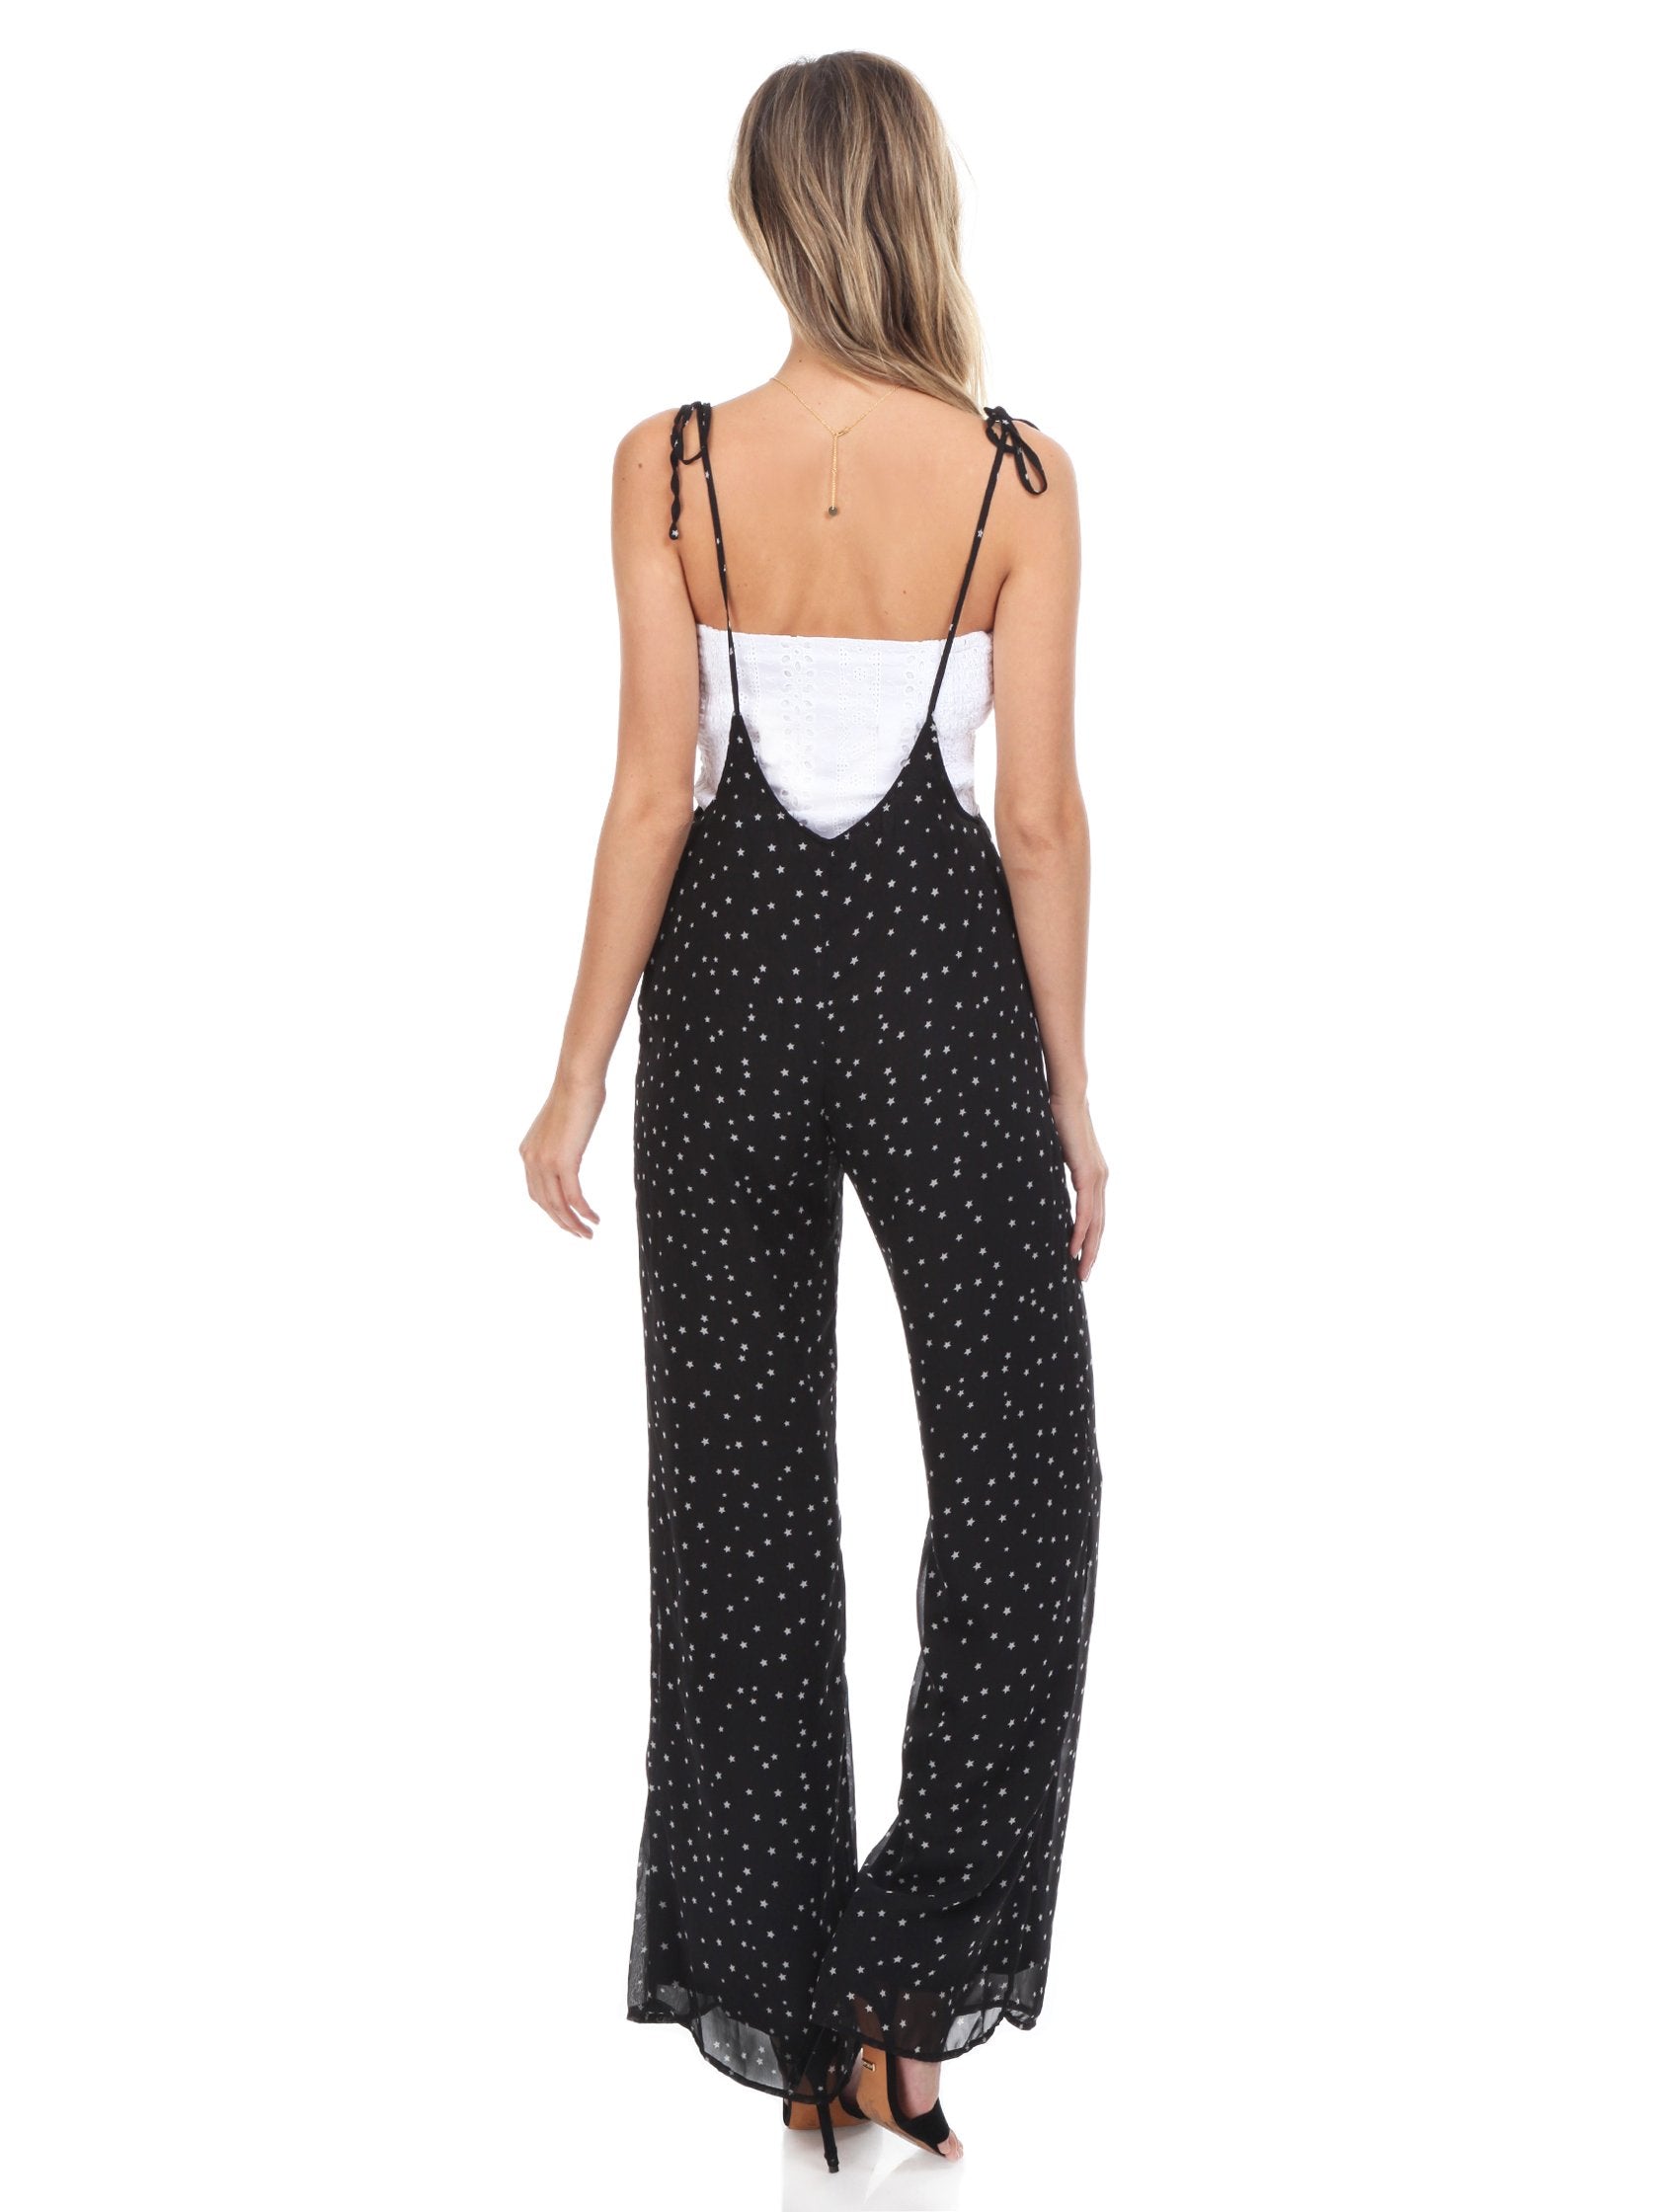 Women wearing a jumpsuit rental from FashionPass called Sasha Star Print Jumpsuit